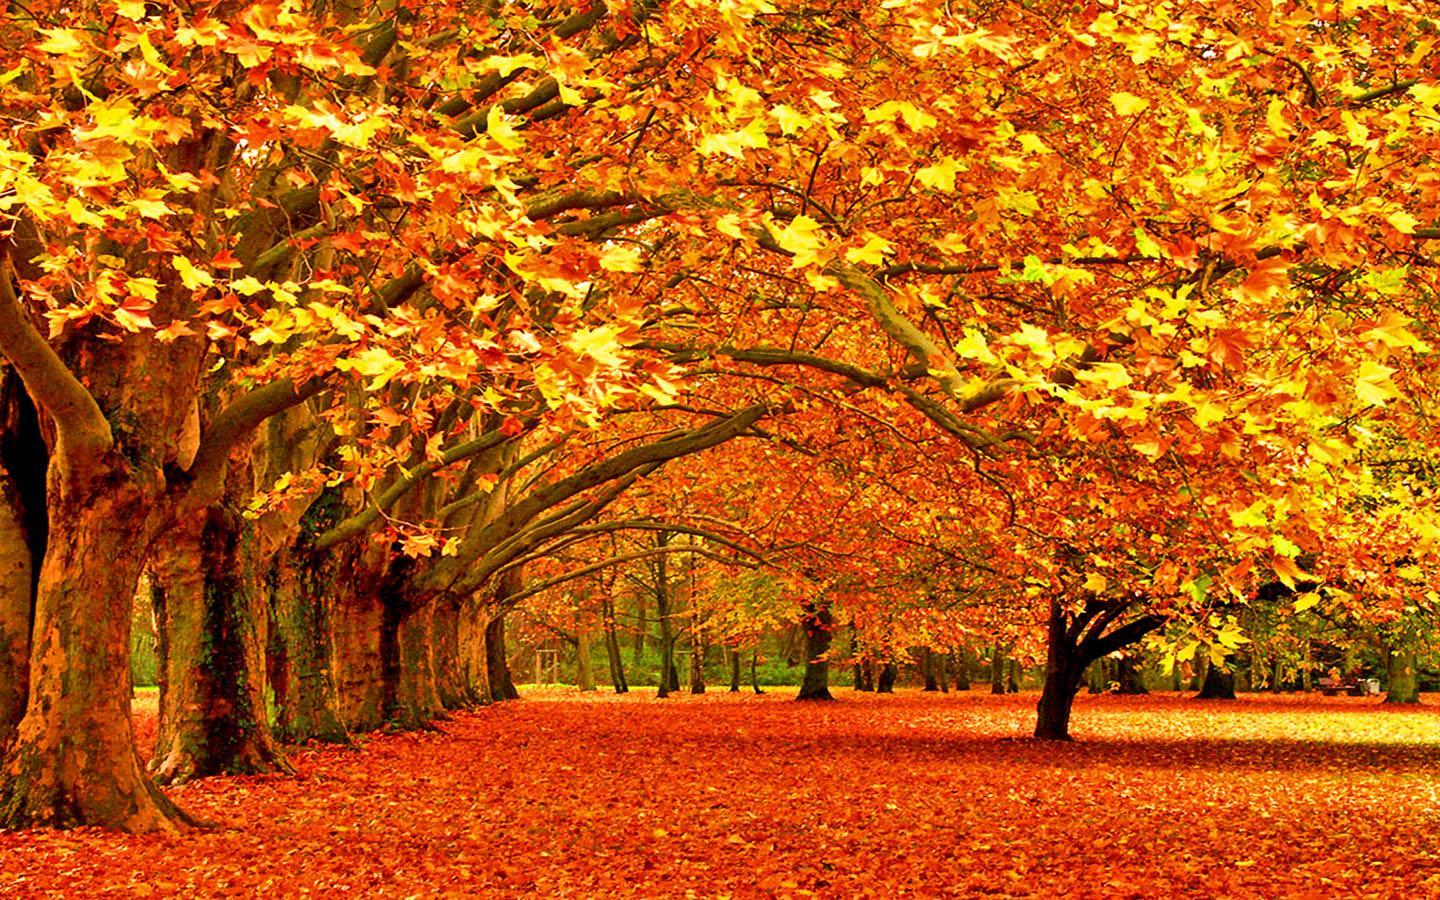 Fall Scenery Wallpapers - Top Free Fall Scenery Backgrounds ...